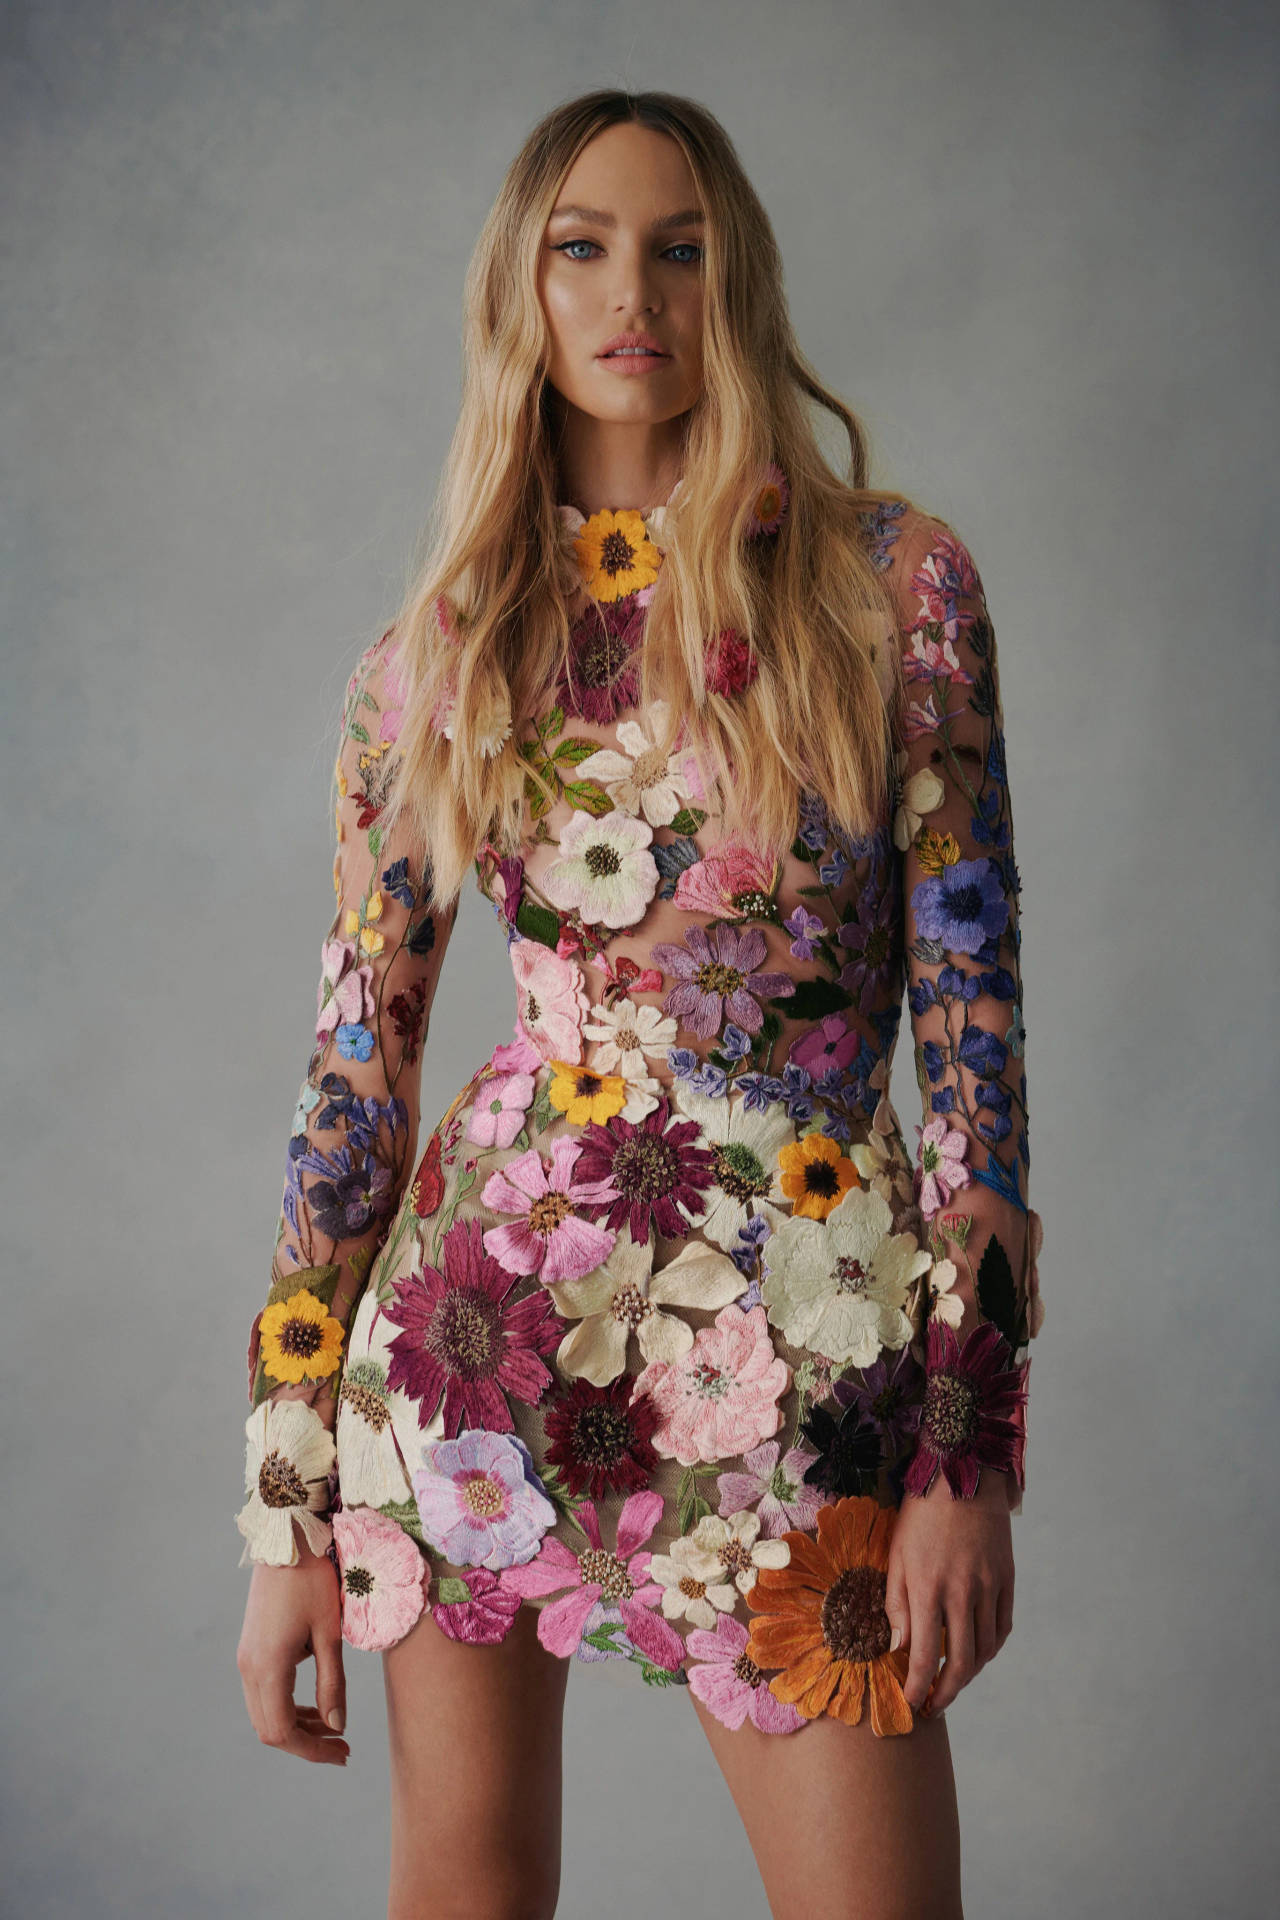 Candice Swanepoel Floral Dress Background